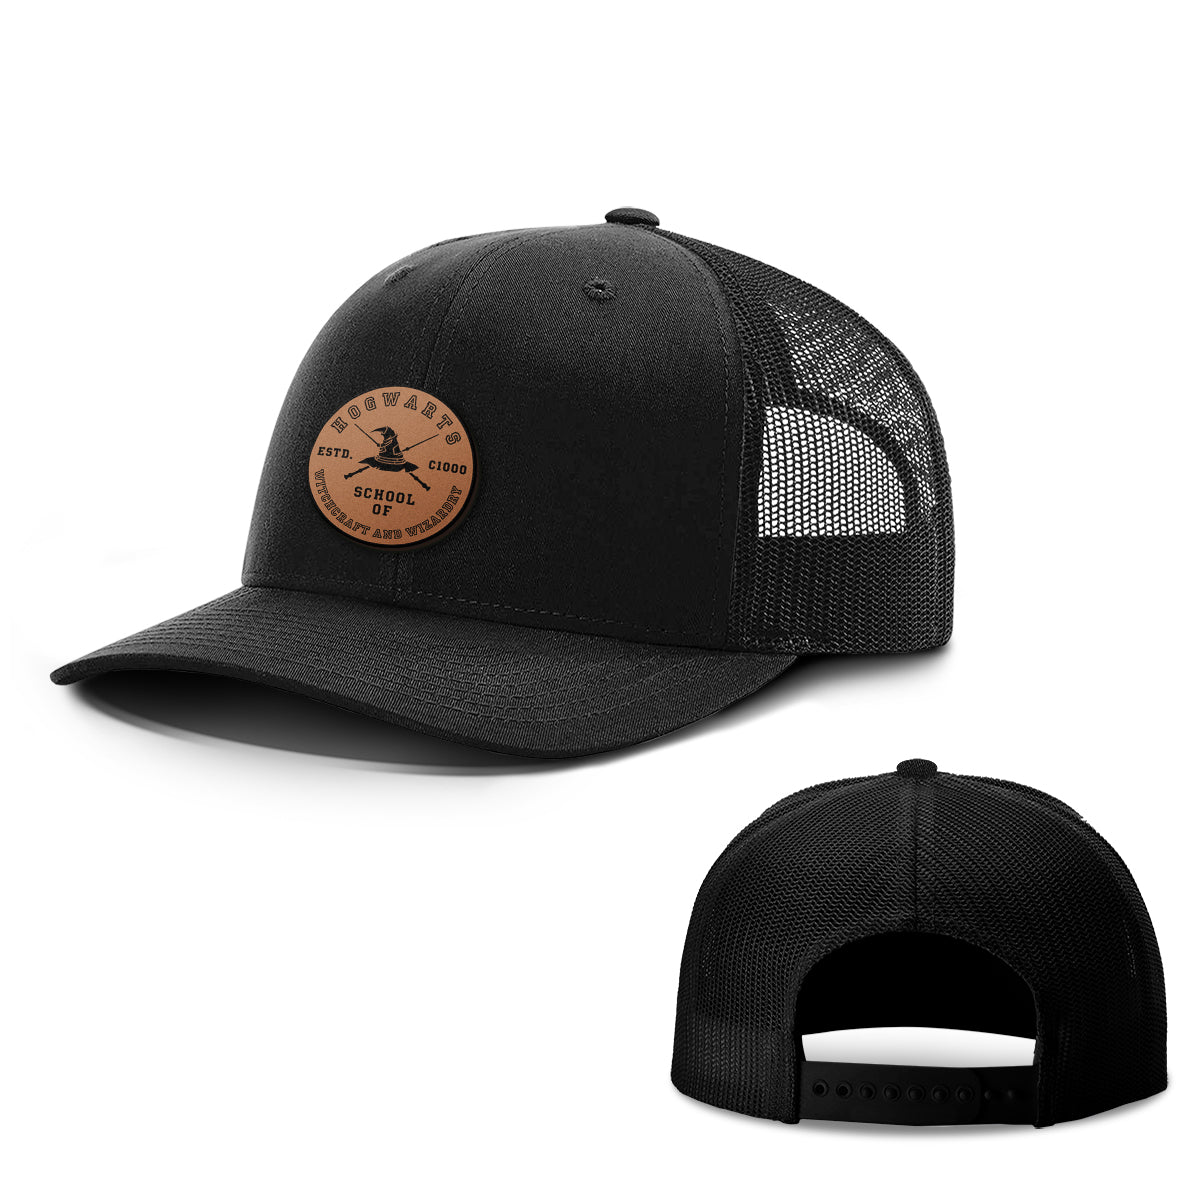 Hogwarts Leather Patch Hats - BustedTees.com